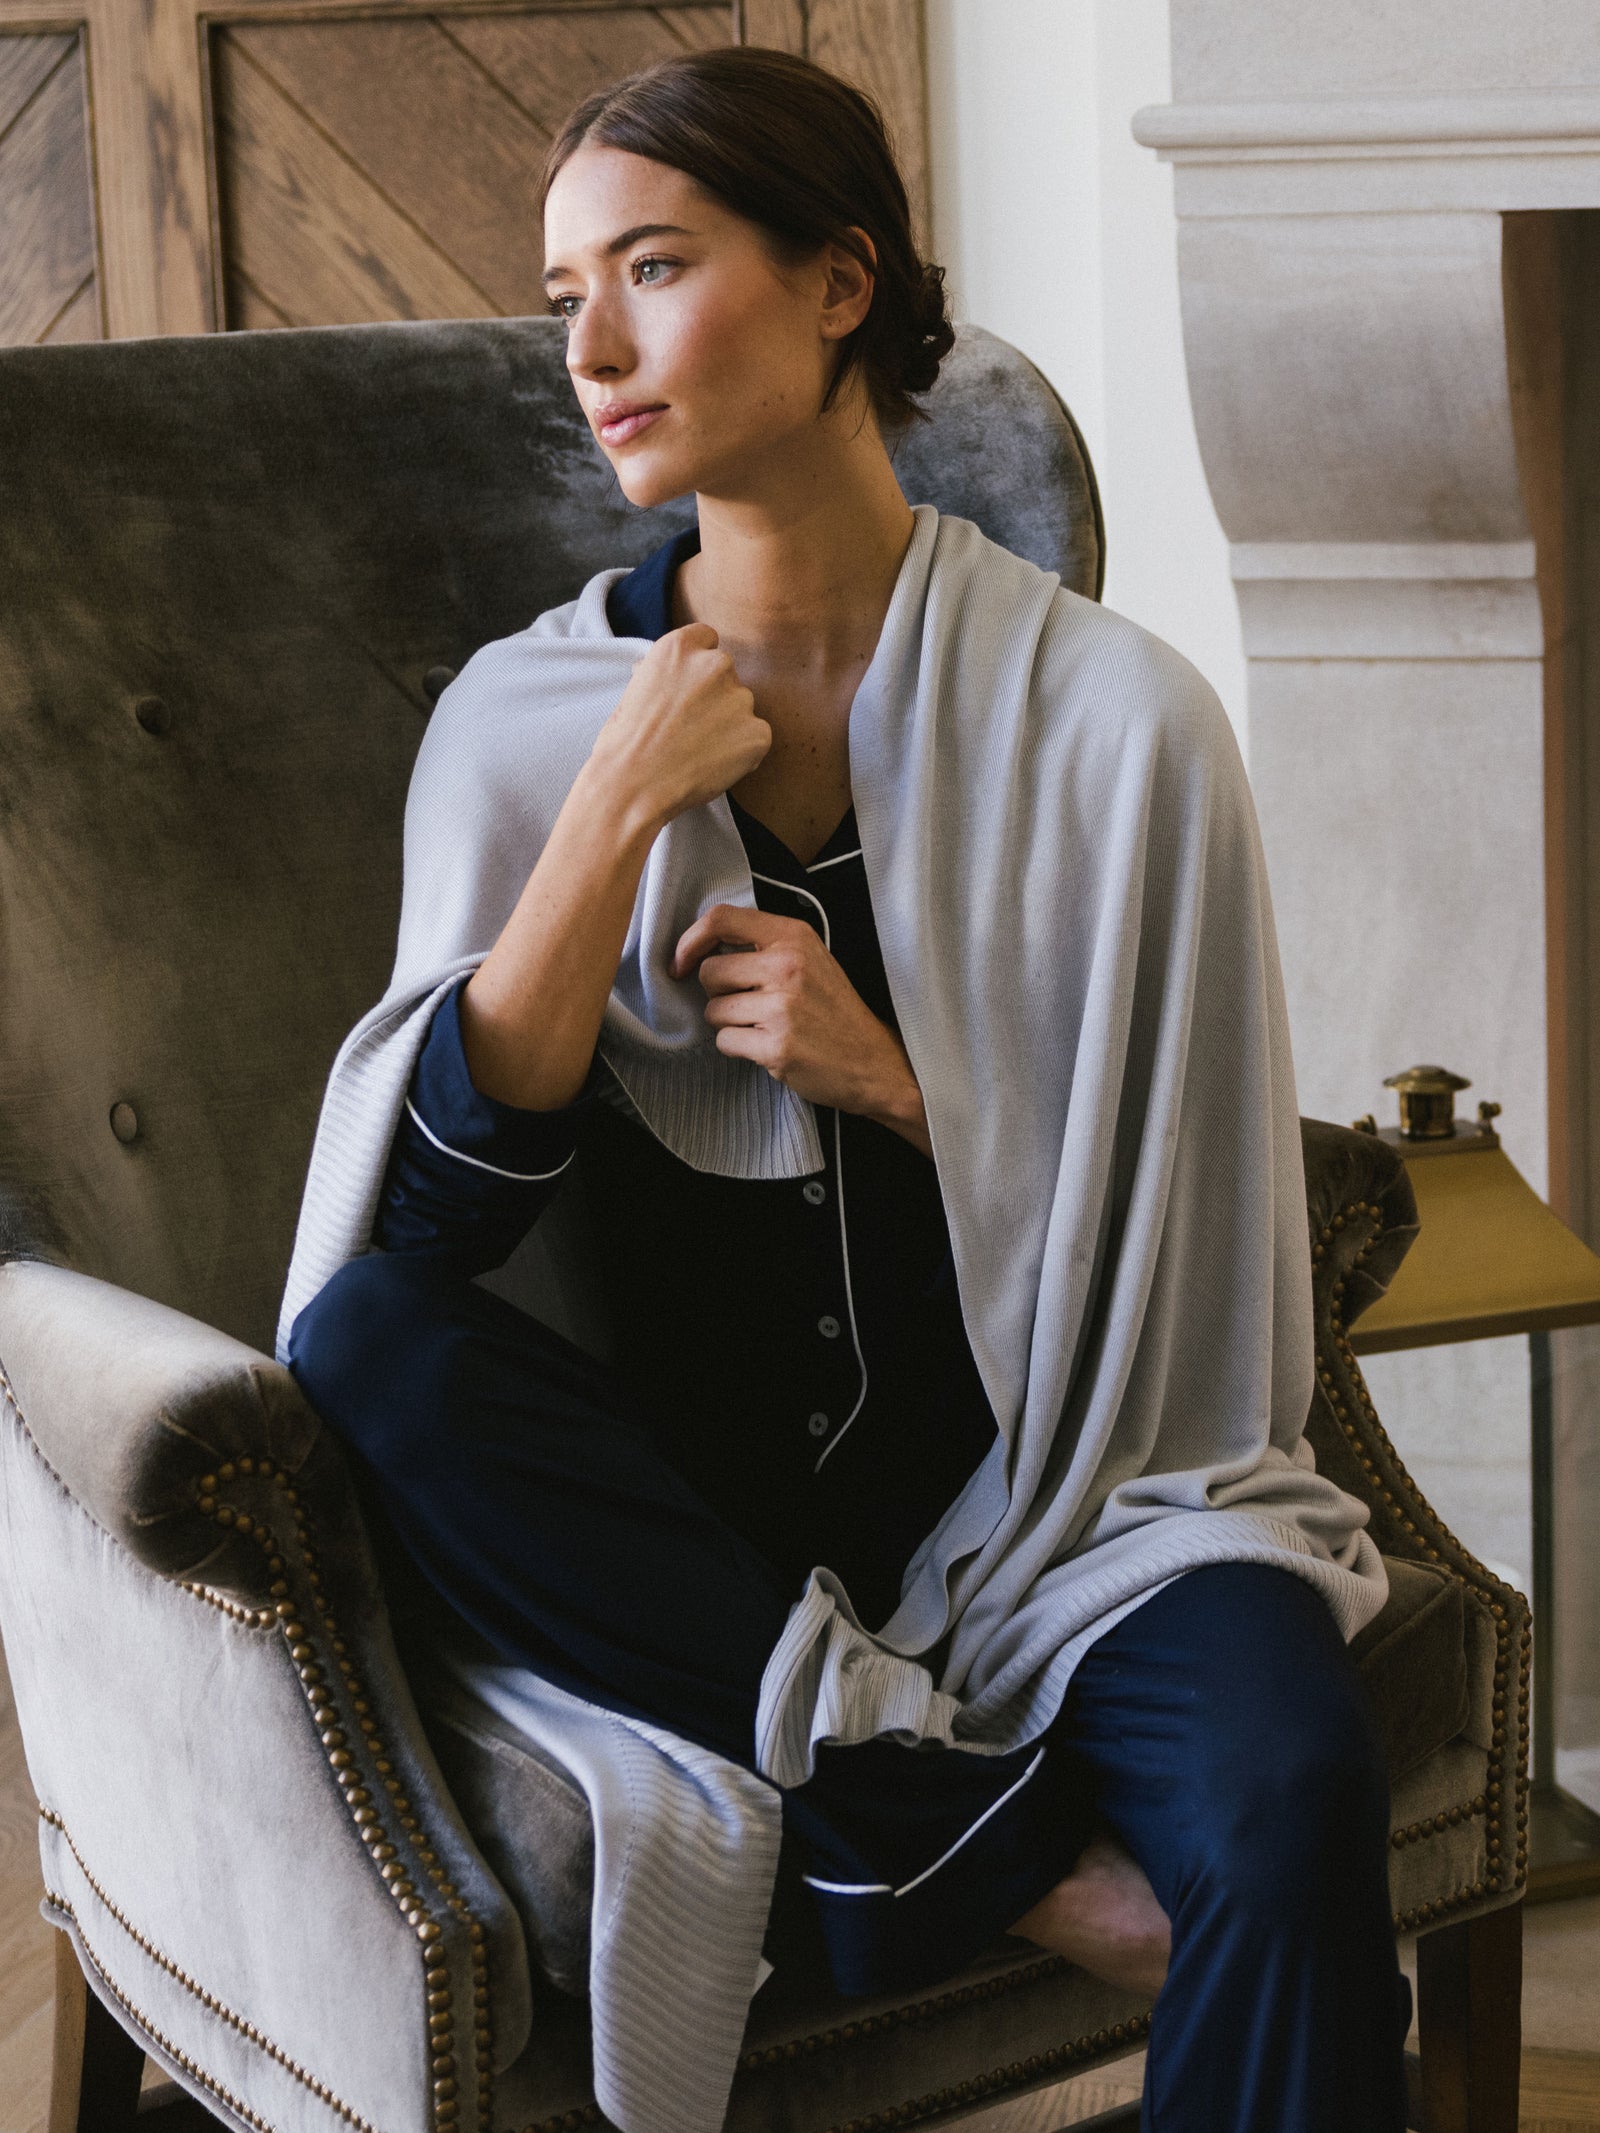 A woman is sitting on a couch. As she longingly looks out what is assumed to be a window, she warms herself with a Light Grey Mini-Knit Blanket.